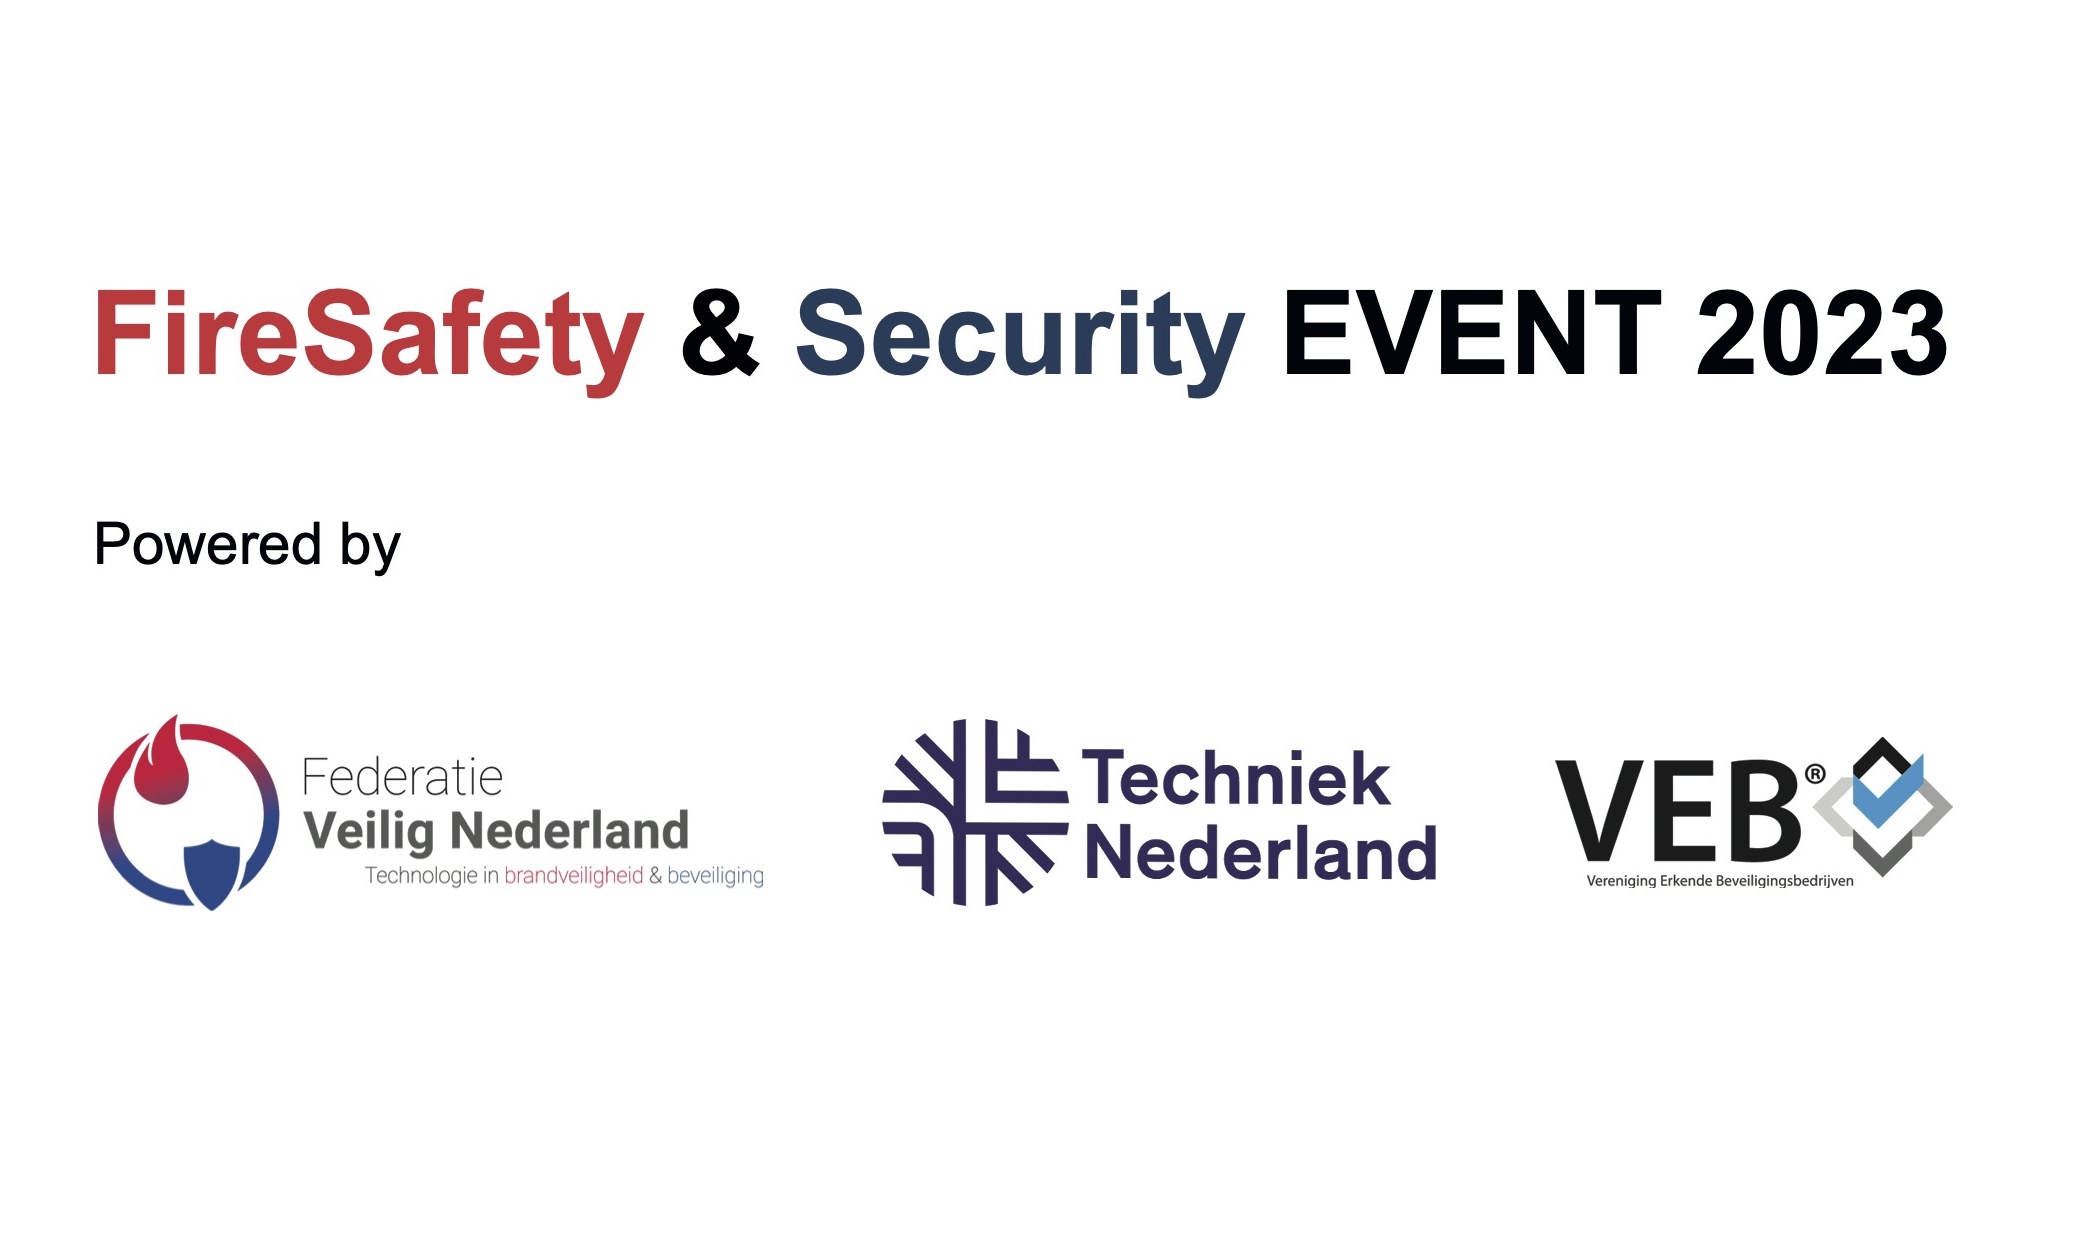 Firesafety and Security Event 2023